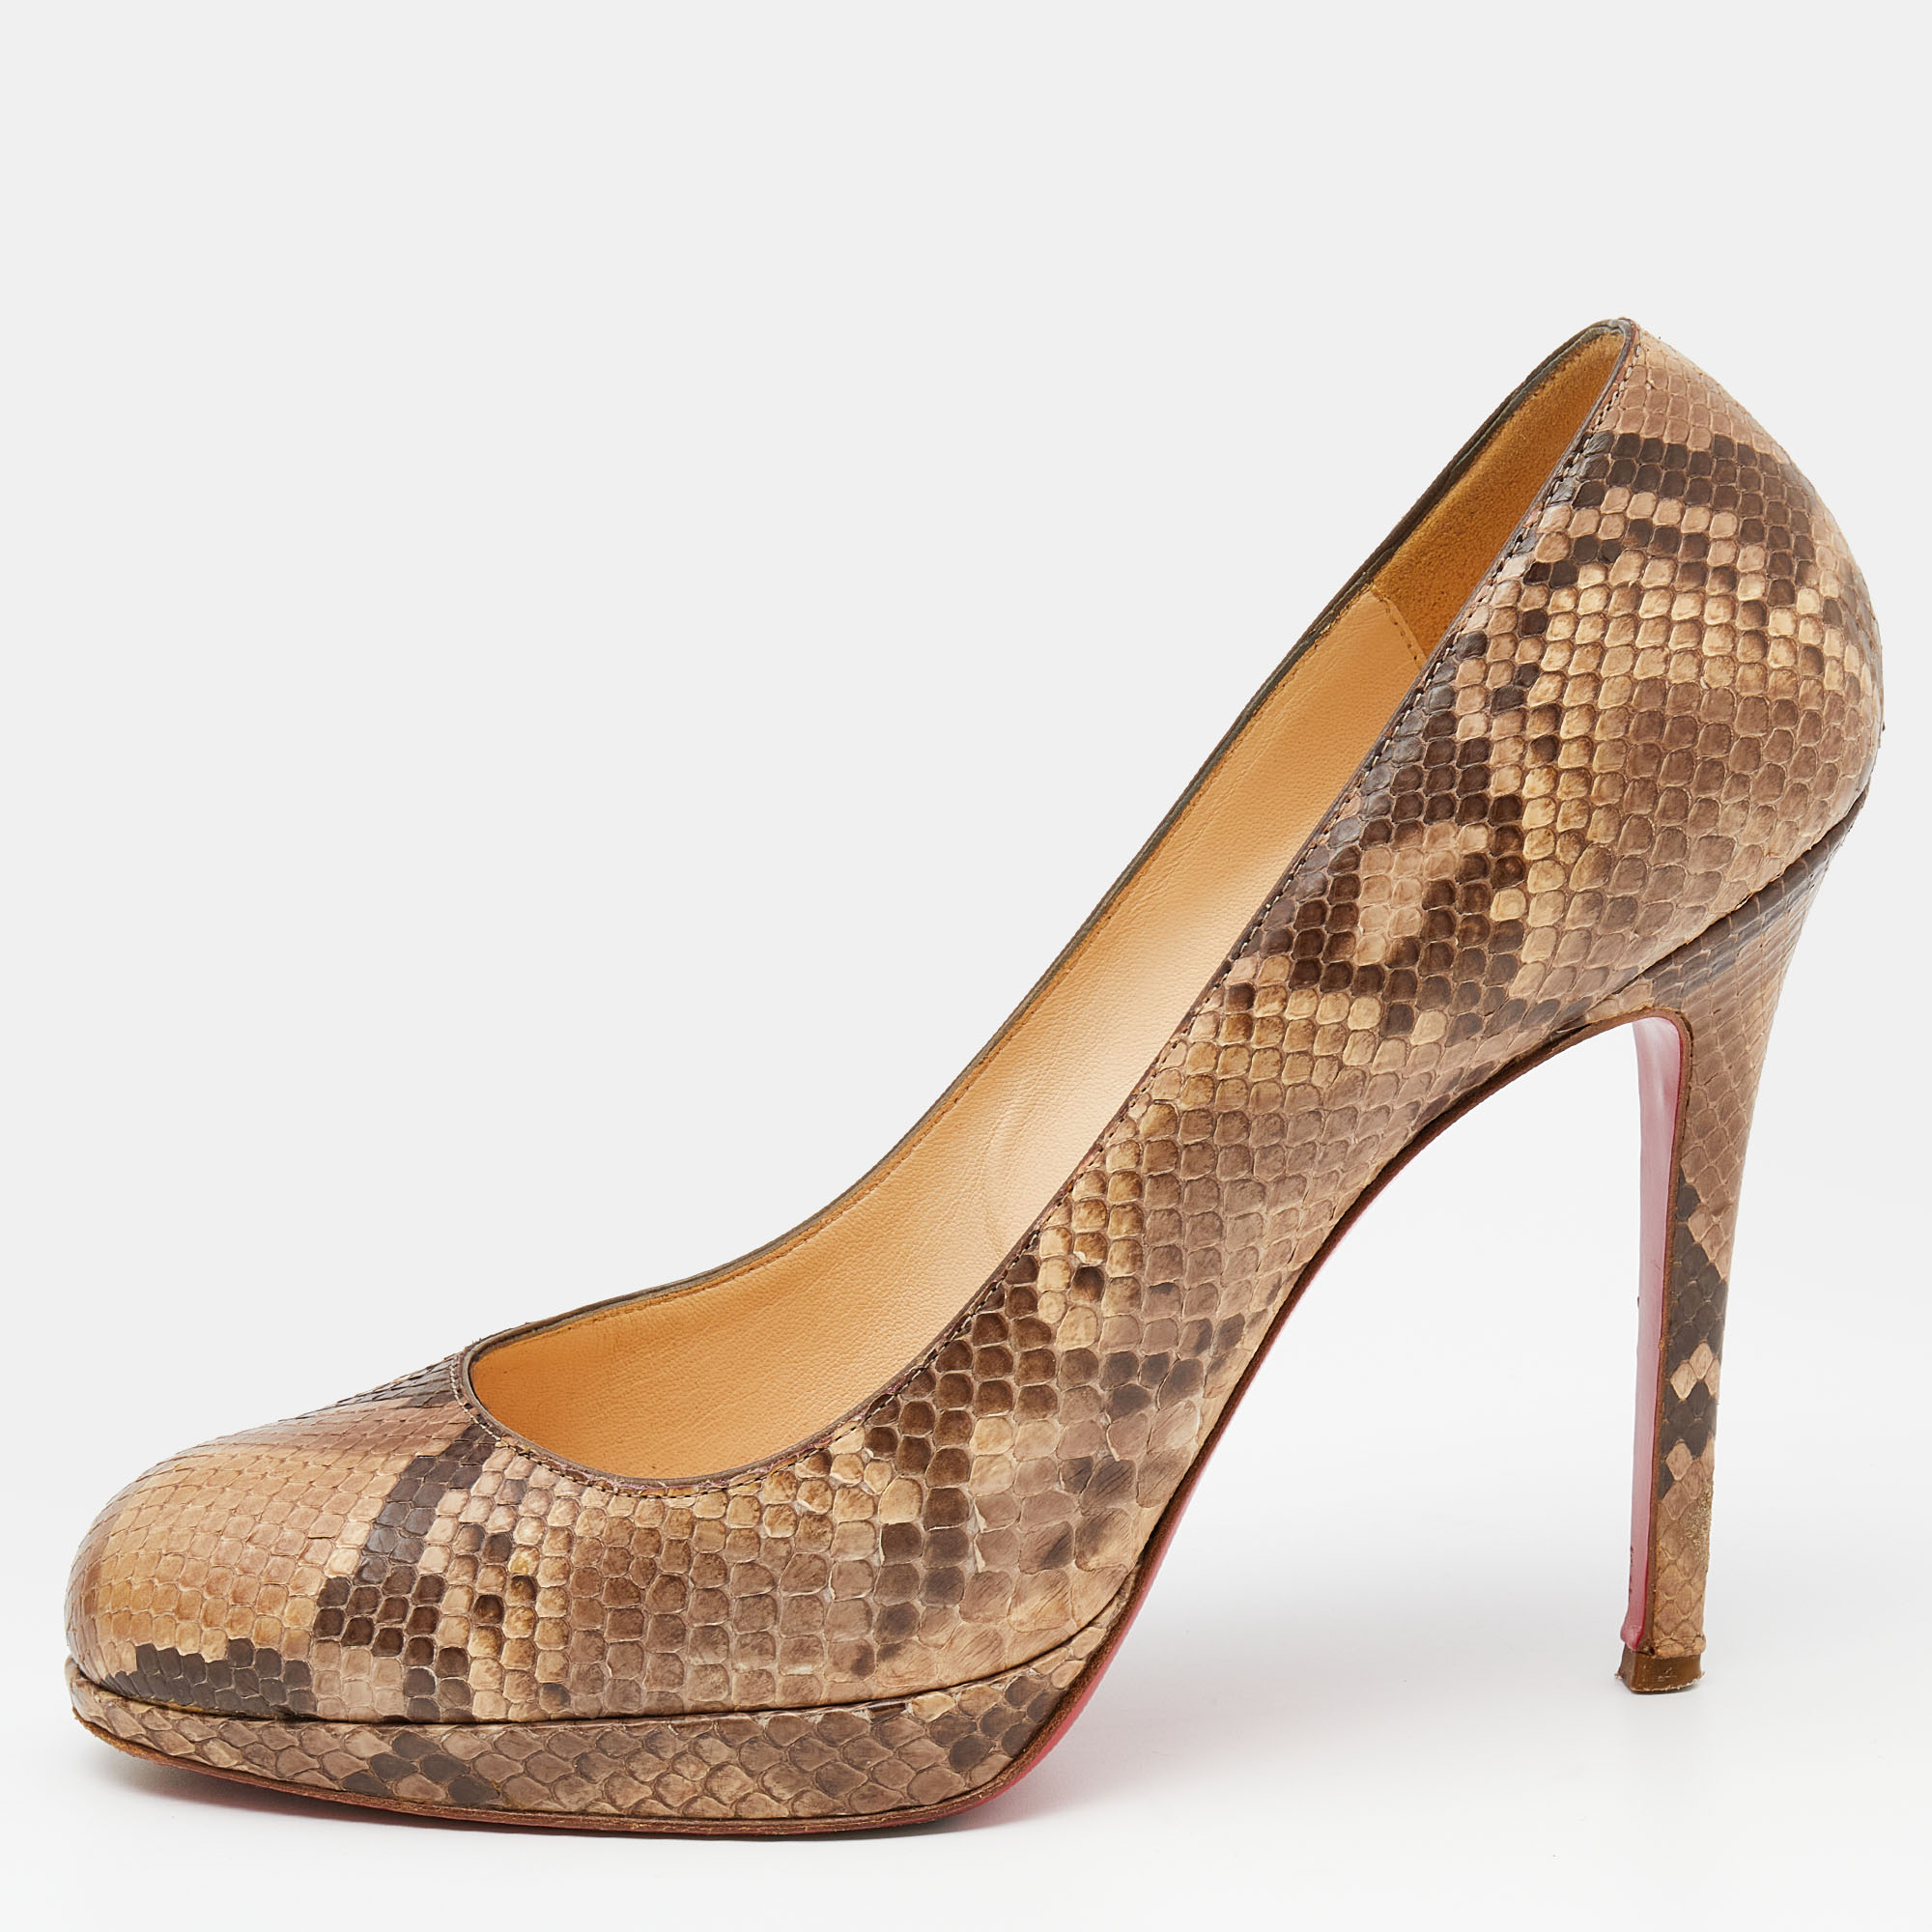 Complete any look by adding these Christian Louboutin New Simple pumps. They are crafted from python leather and designed with covered toes and 11.5 cm stiletto heels. A pair of exotic pumps by CL is a must have